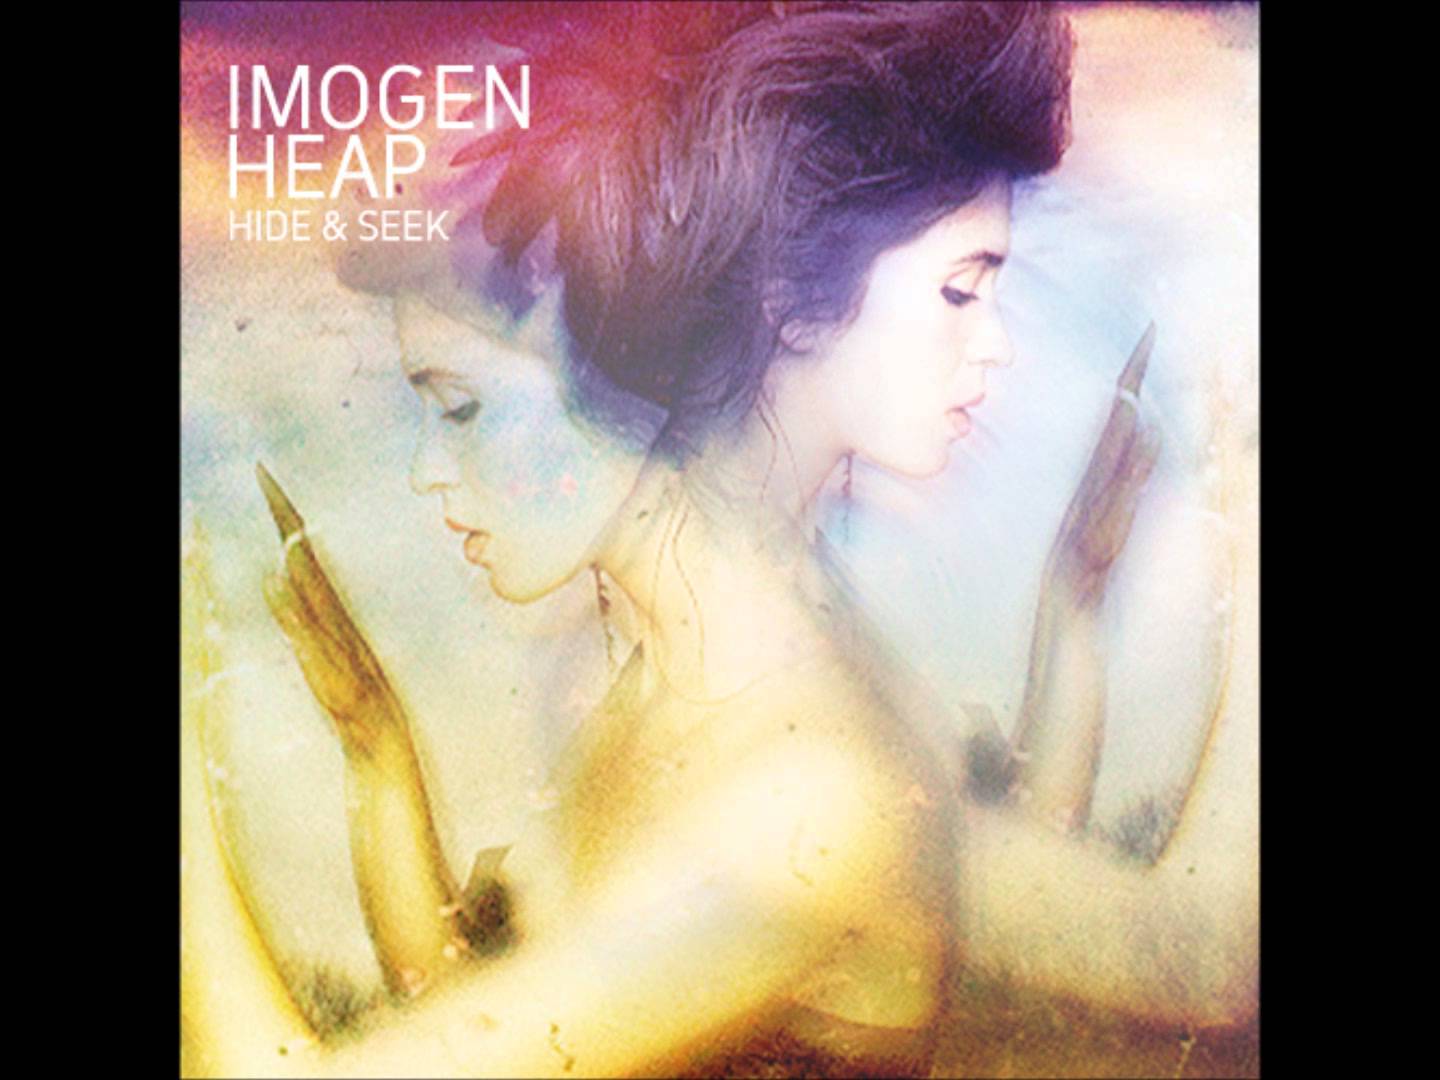 Imogen Heap - Mmm, What to say?